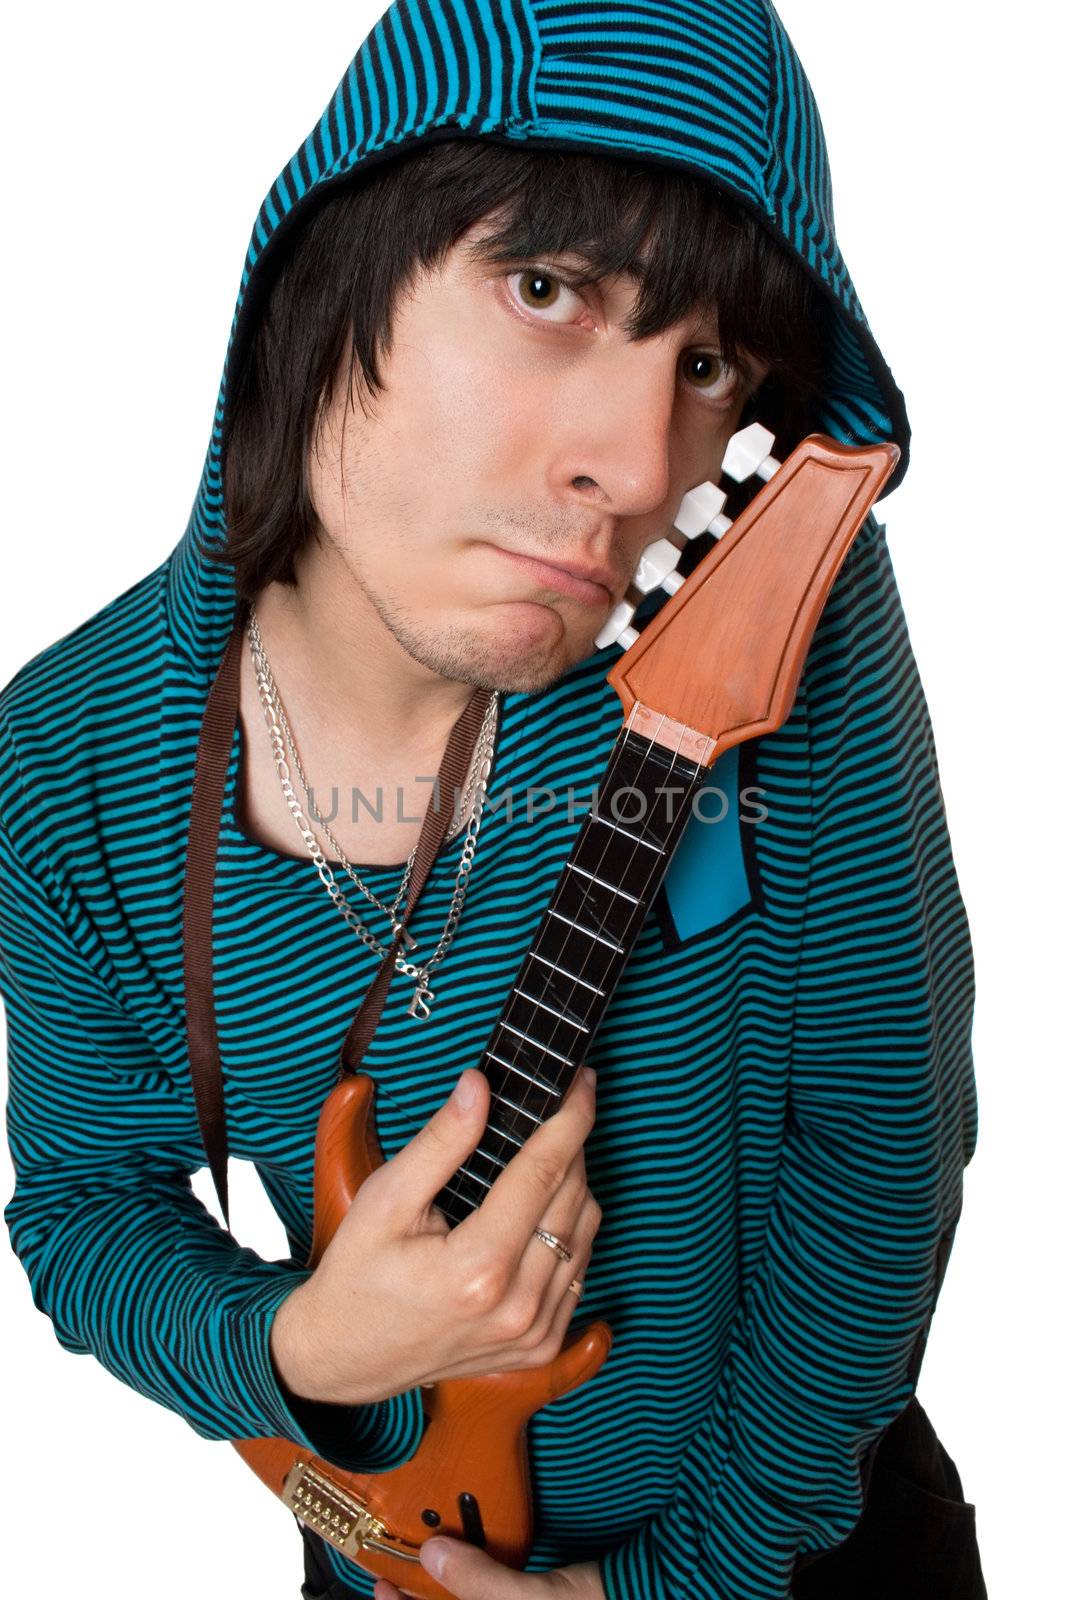 Bizarre young man with a little guitar. Isolated on white